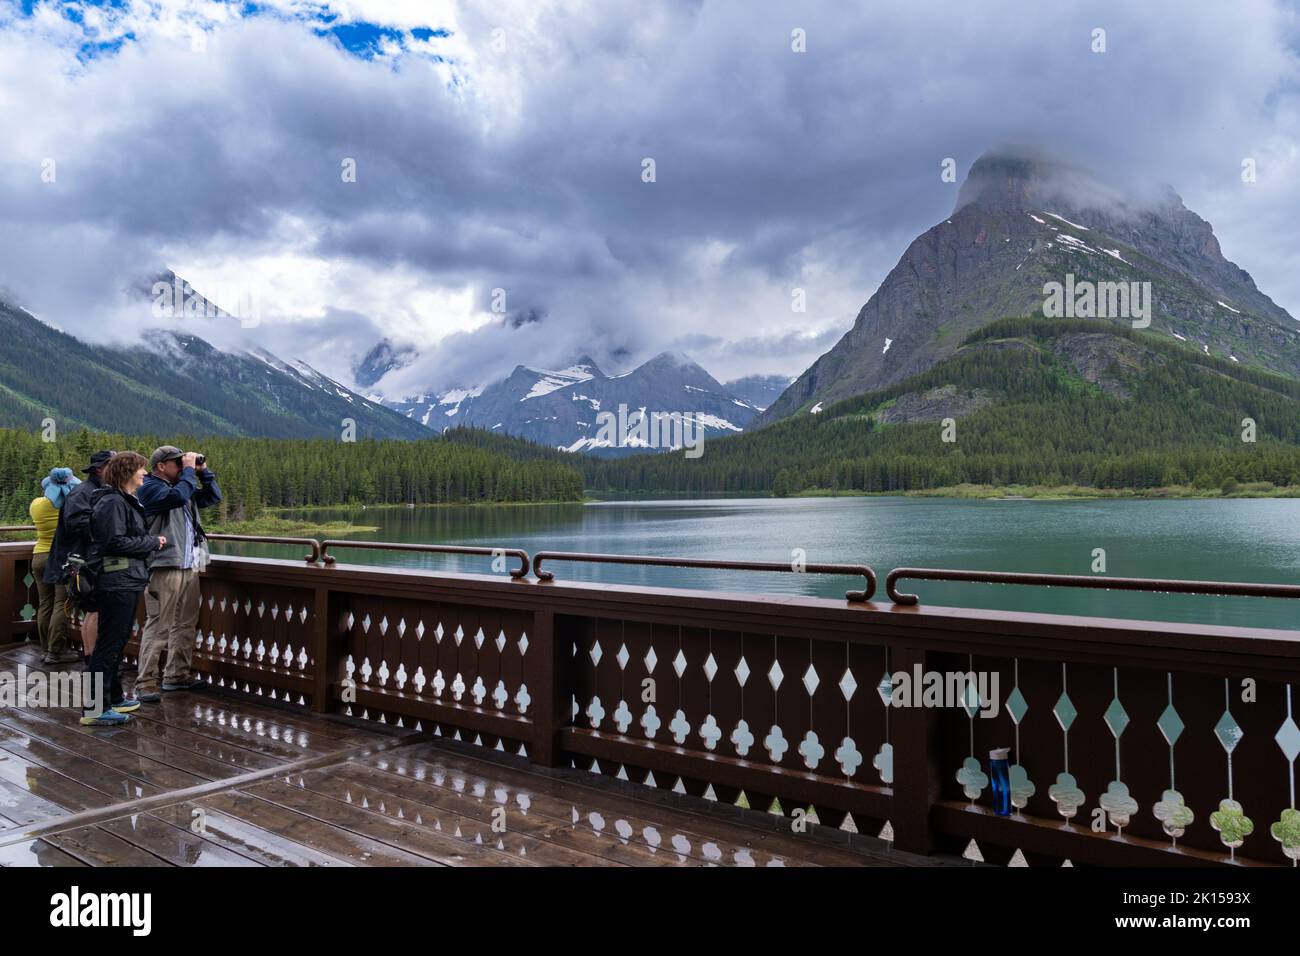 Montana, USA - July 4, 2022: Tourists on the deck of the Many Glacier hotel use binoculars to spot wildlife in Glacier National Park Stock Photo